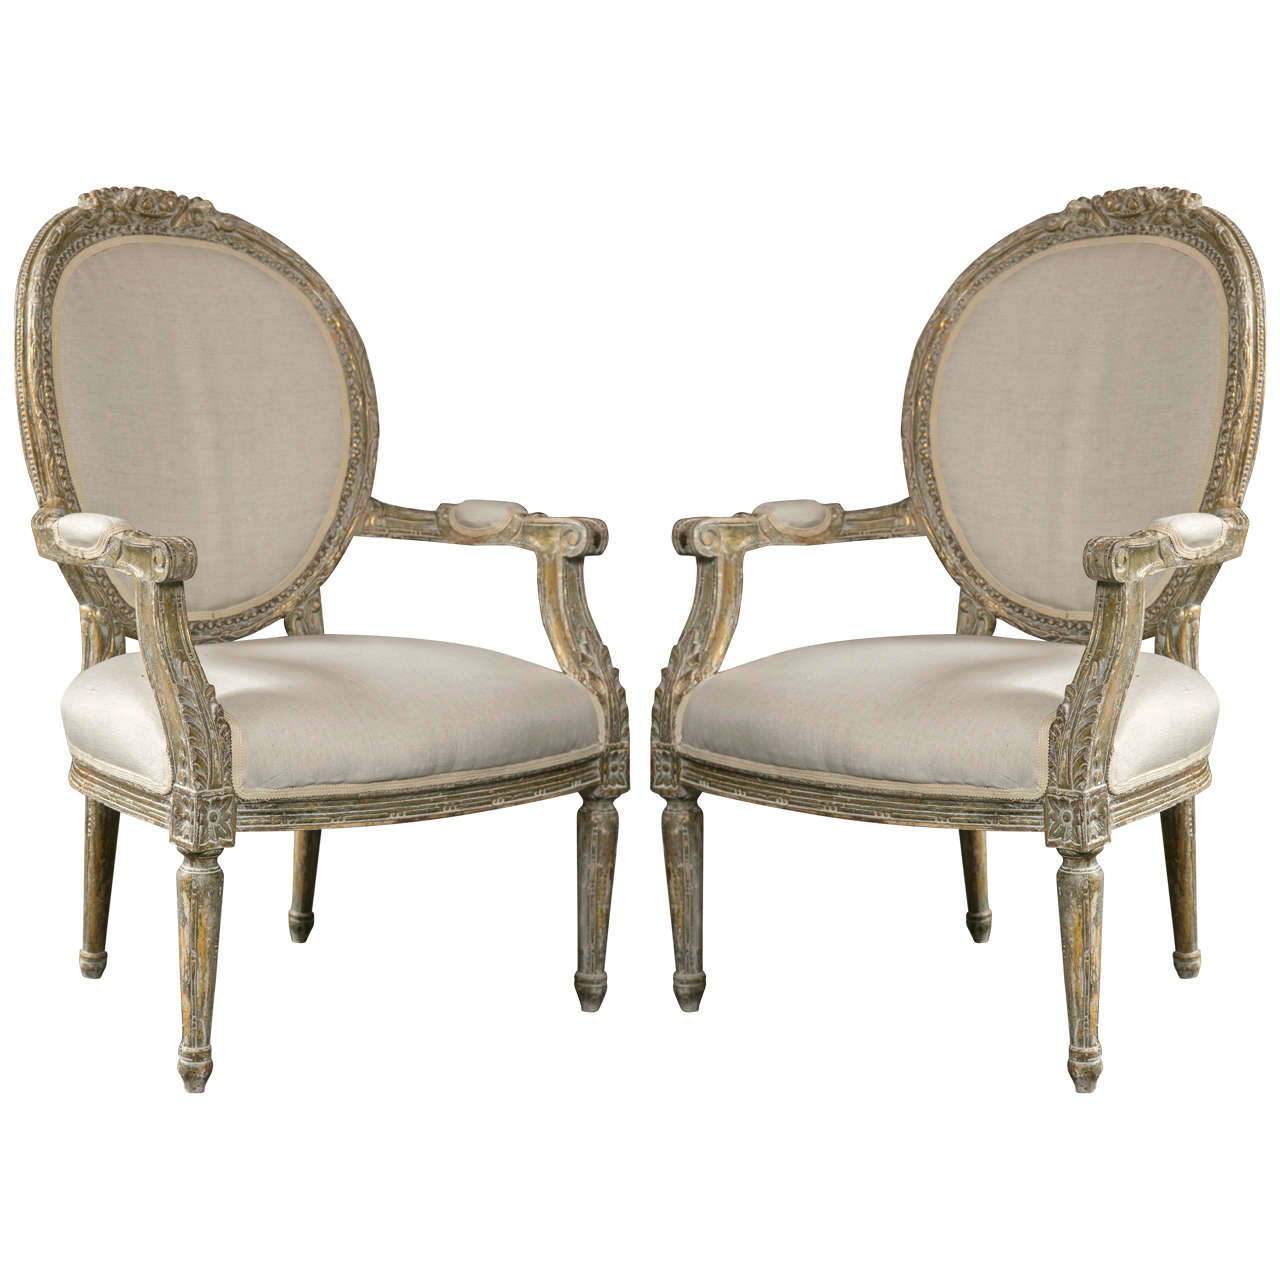 Pair of French Louis XVI Style Fauteuils